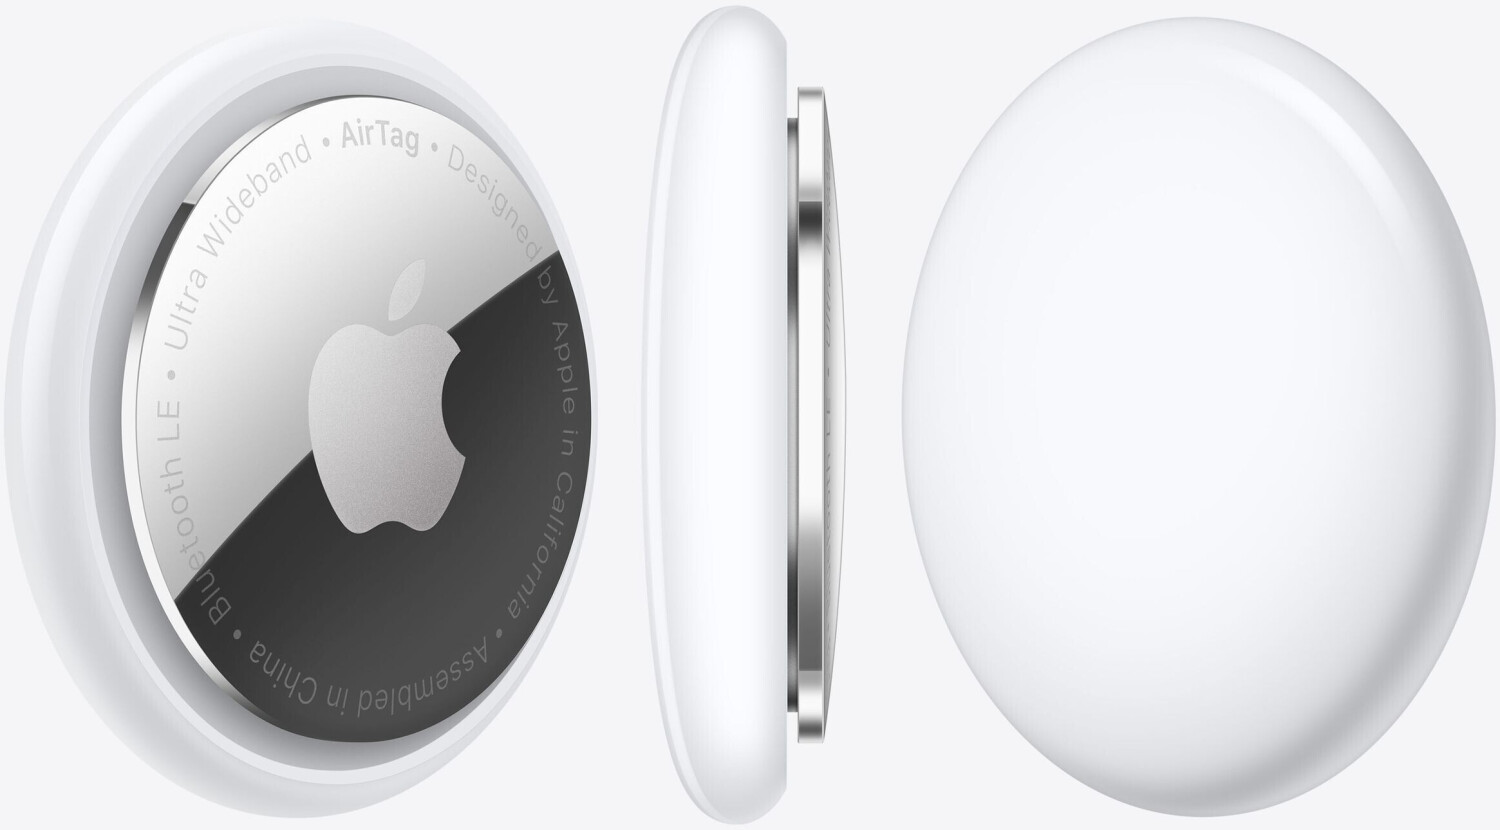 Airtag 4 Pack Sale Buy Apple AirTag 4 pack from £85.99 (Today) – Best Deals on idealo.co.uk